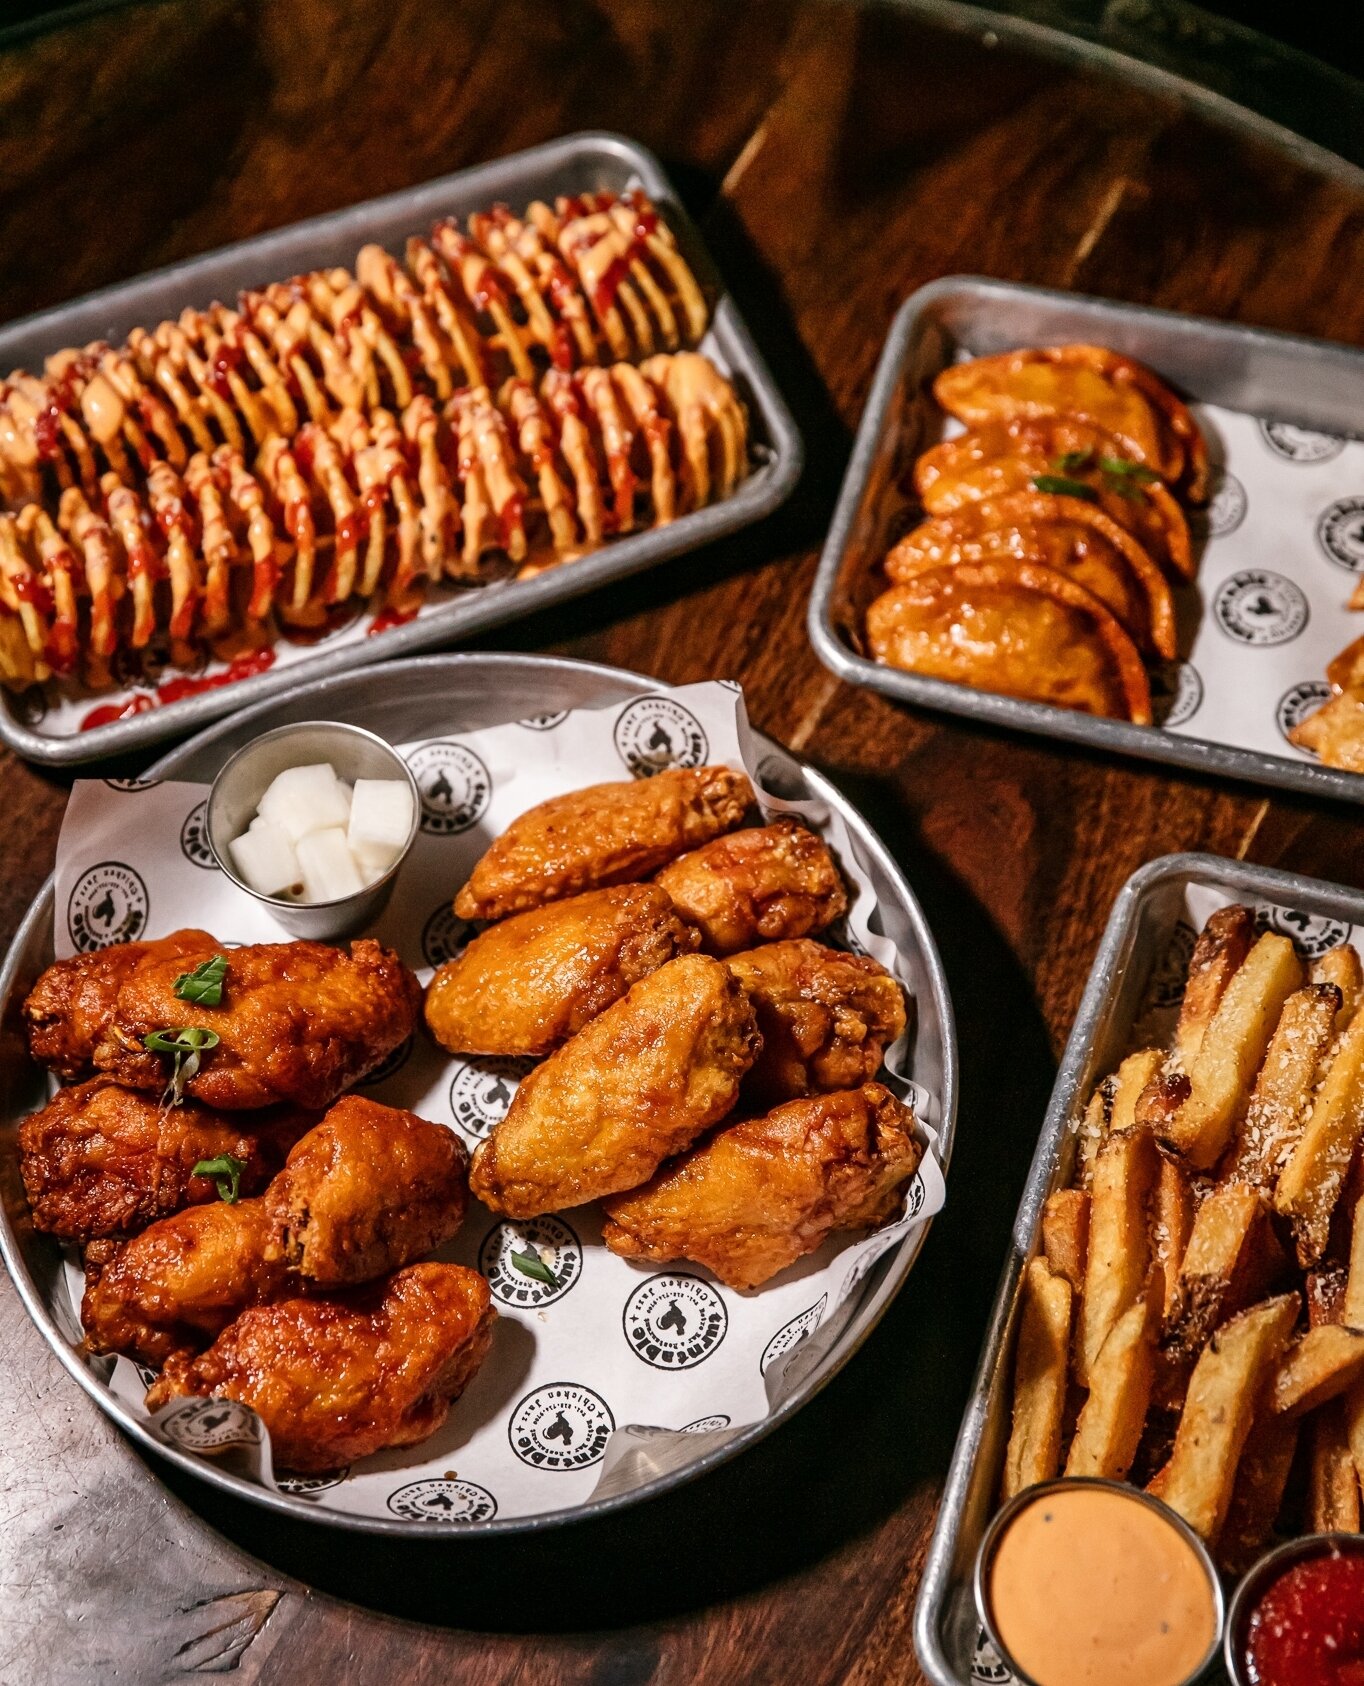 A low key speakeasy with incredible food and drinks...plus, private Karaoke rooms!⁠
⁠
We're famous for our Korean Fried Chicken!⁠
⁠
Located in K-Town at⁠
34-36 W 32nd Street (5th Floor)⁠
New York, NY!⁠
⁠
Food Delivery is available with Grubhub, Doord